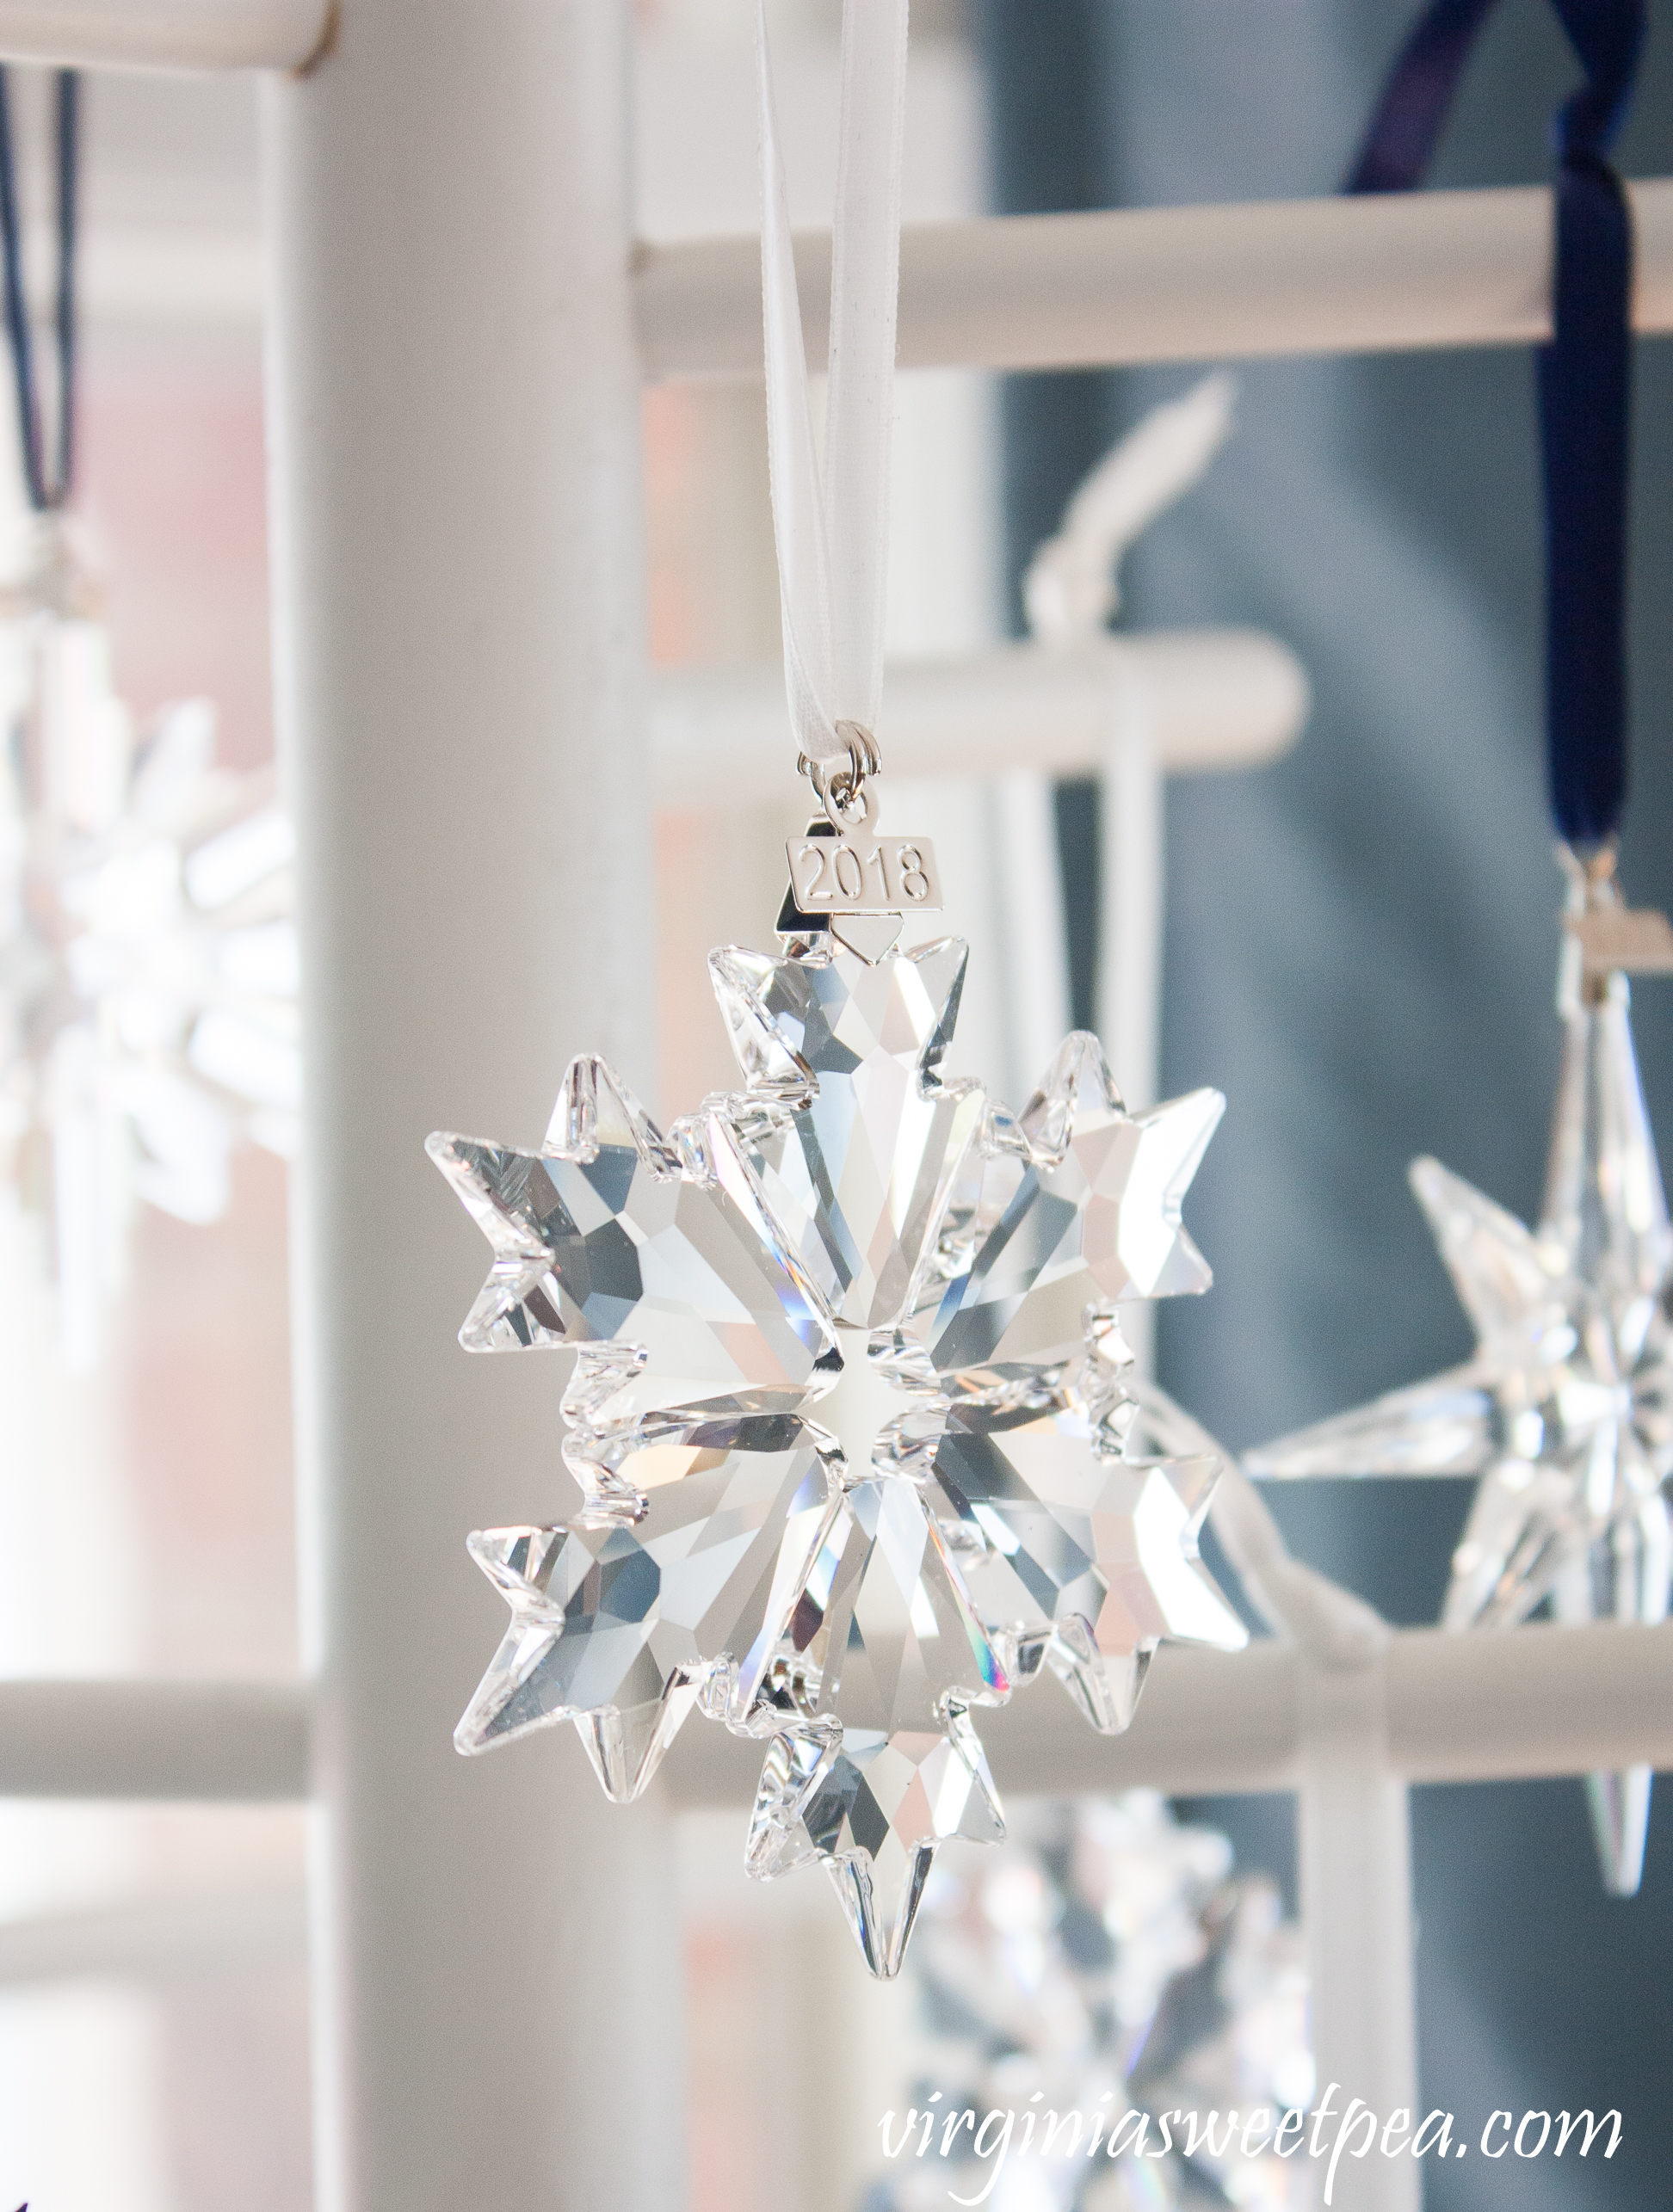 Swarovski Snowflake Ornaments - A collection of snowflakes from 1994 - 2018 is displayed on a wooden tree. #swarovski #swarovskiornaments #swarovskisnowflakeornaments